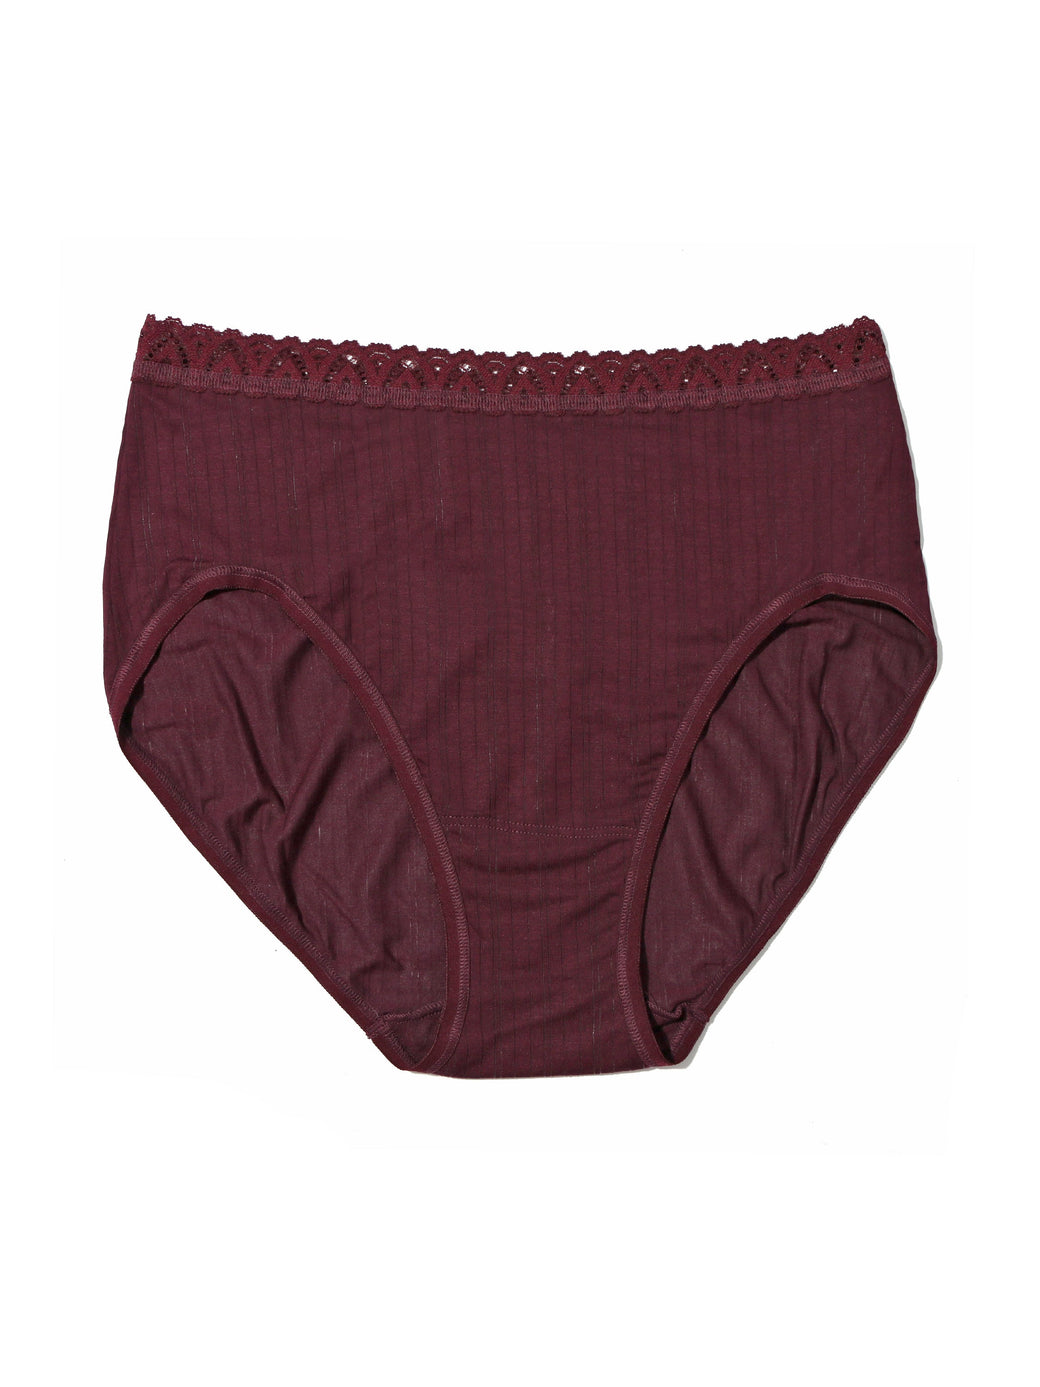 MellowLuxe™ French Brief Dried Cherry Red Sale